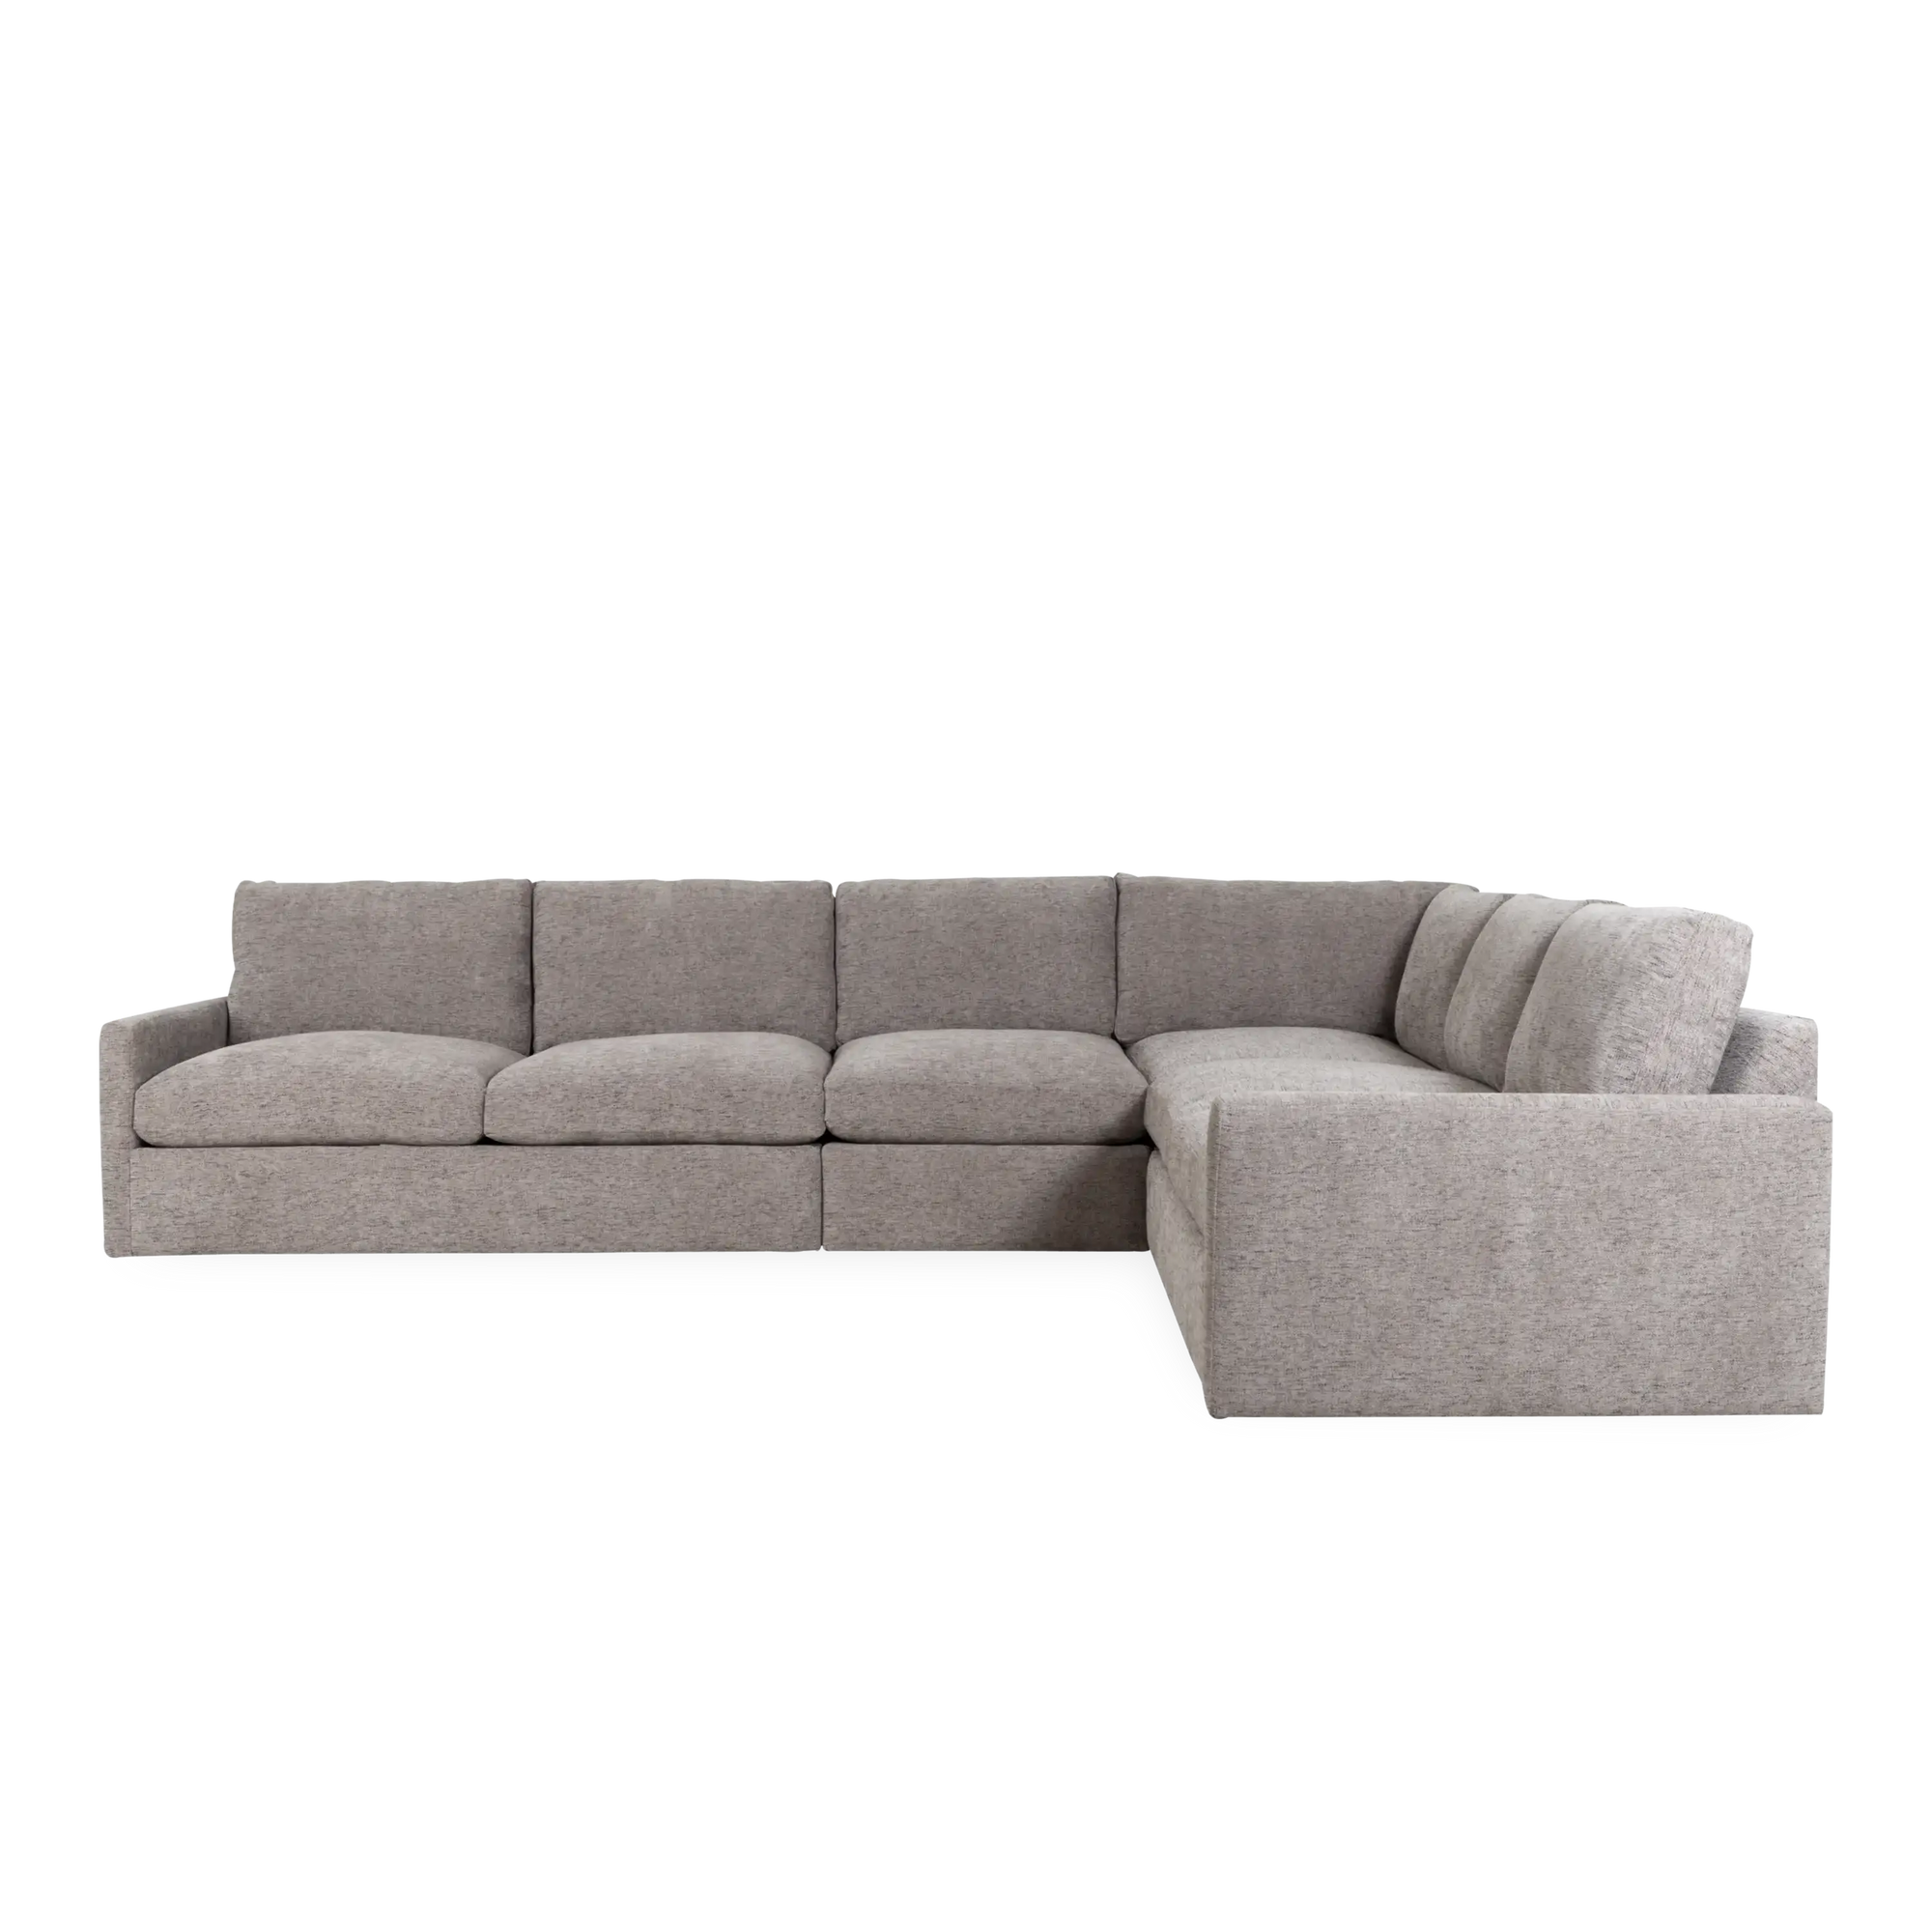 With its clean lines and balanced proportions, the Santa Monica Corner Sectional is full of modern appeal.